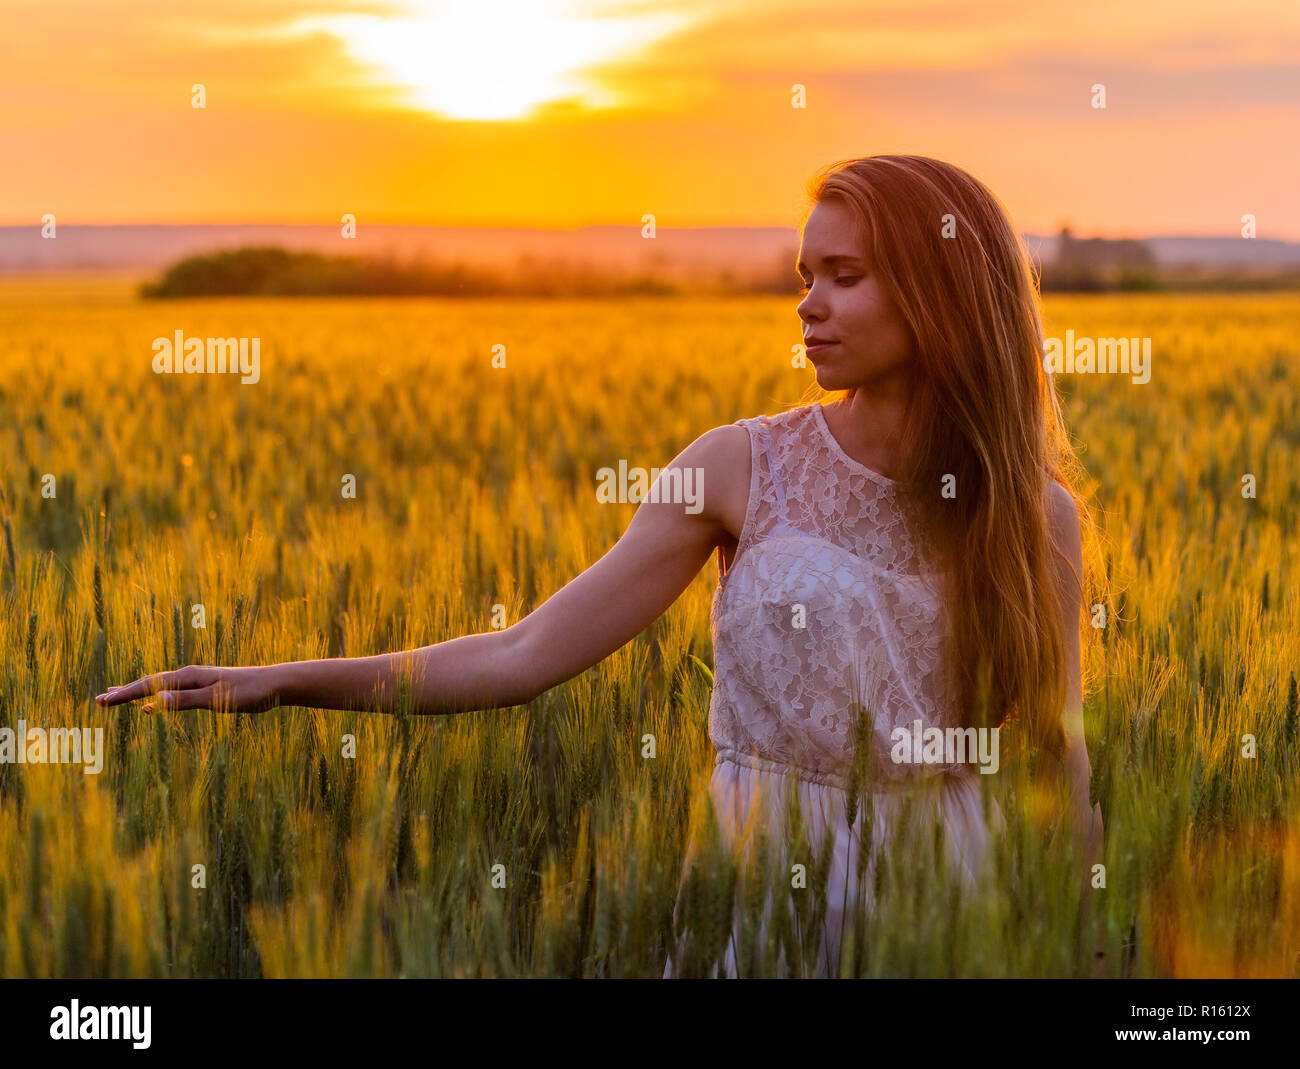 Girl touch ears of wheat at sunset Stock Photo